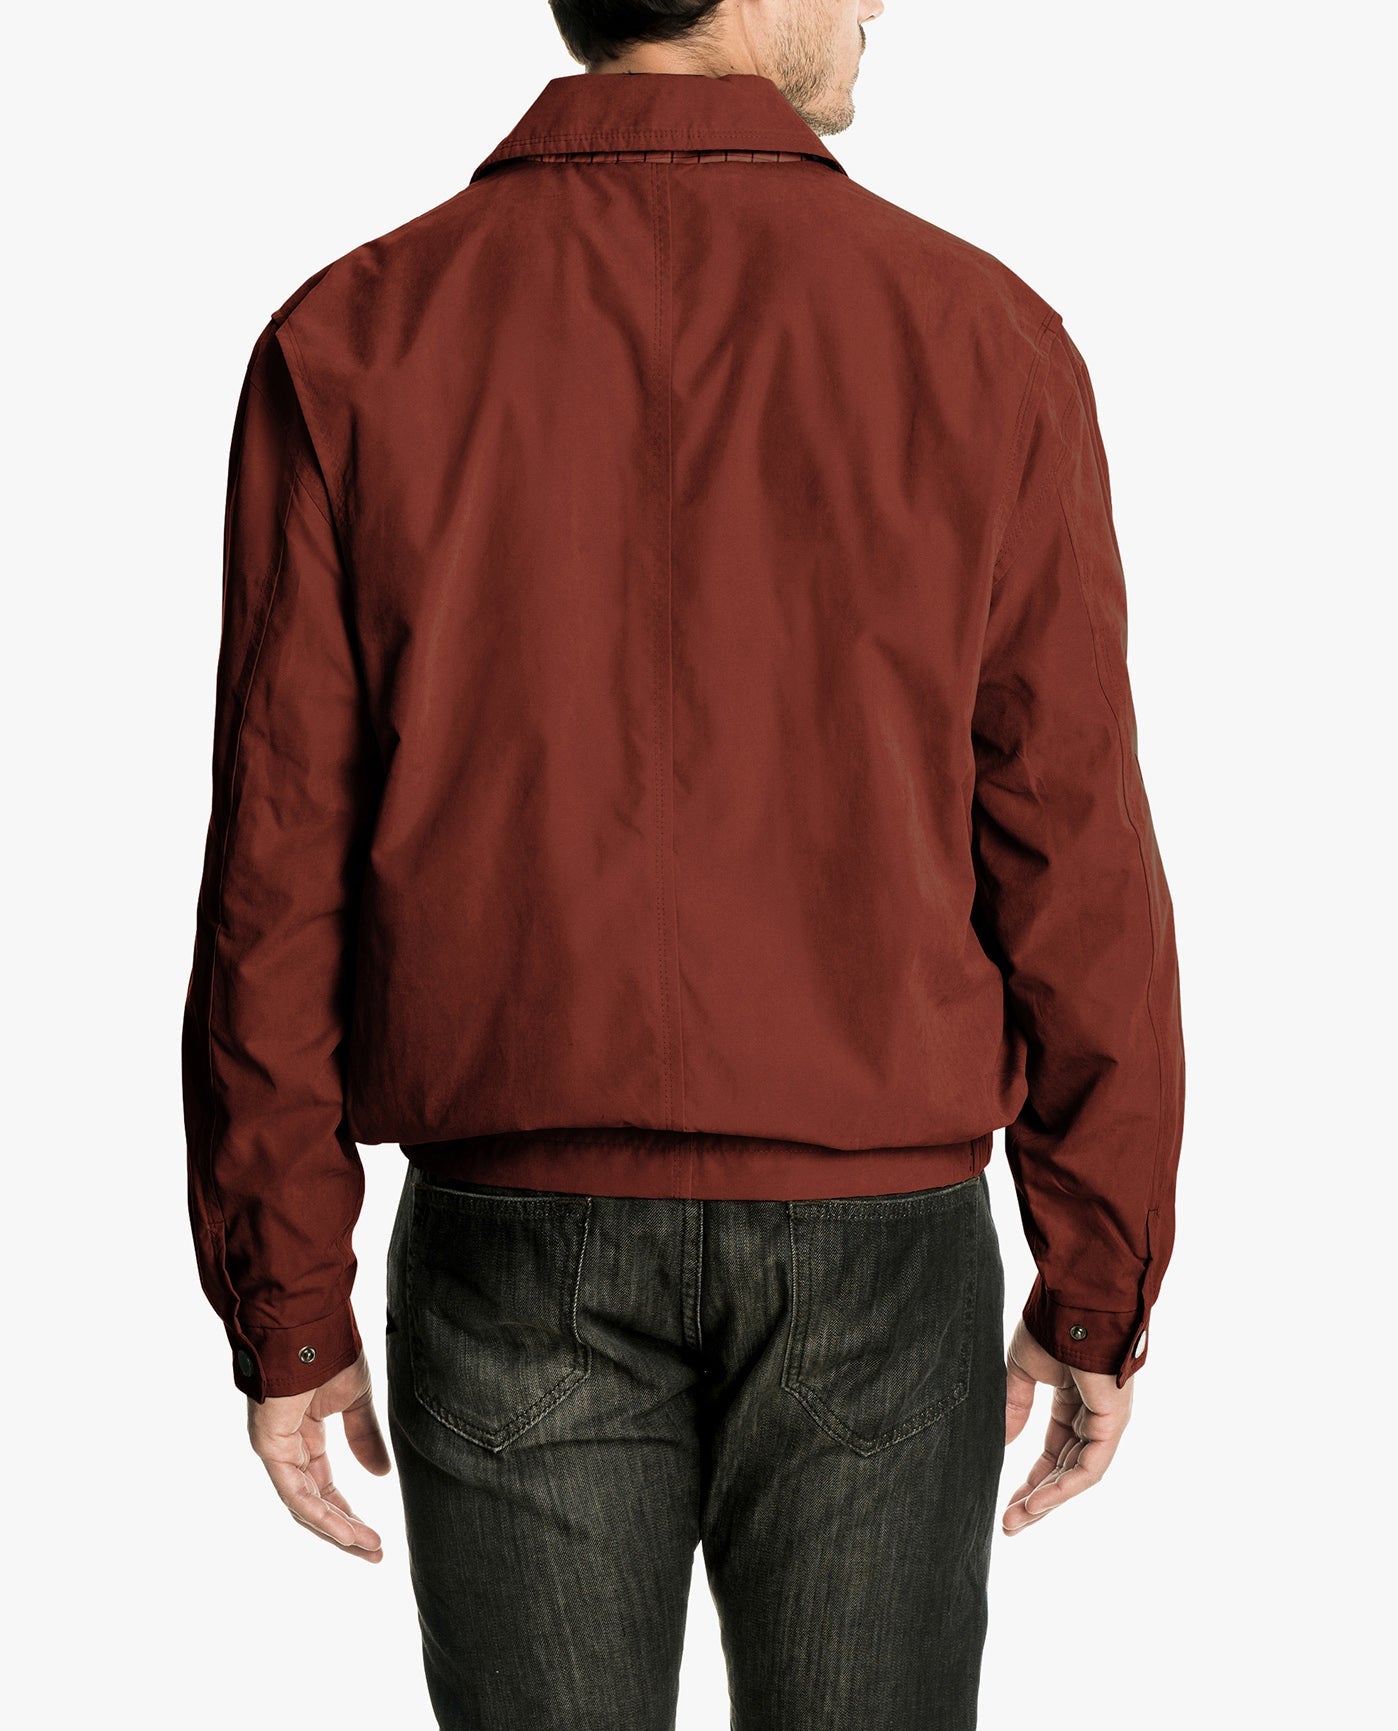 BACK VIEW OF LIGHT WEIGHT ZIP FRONT GOLF JACKET | CHILI